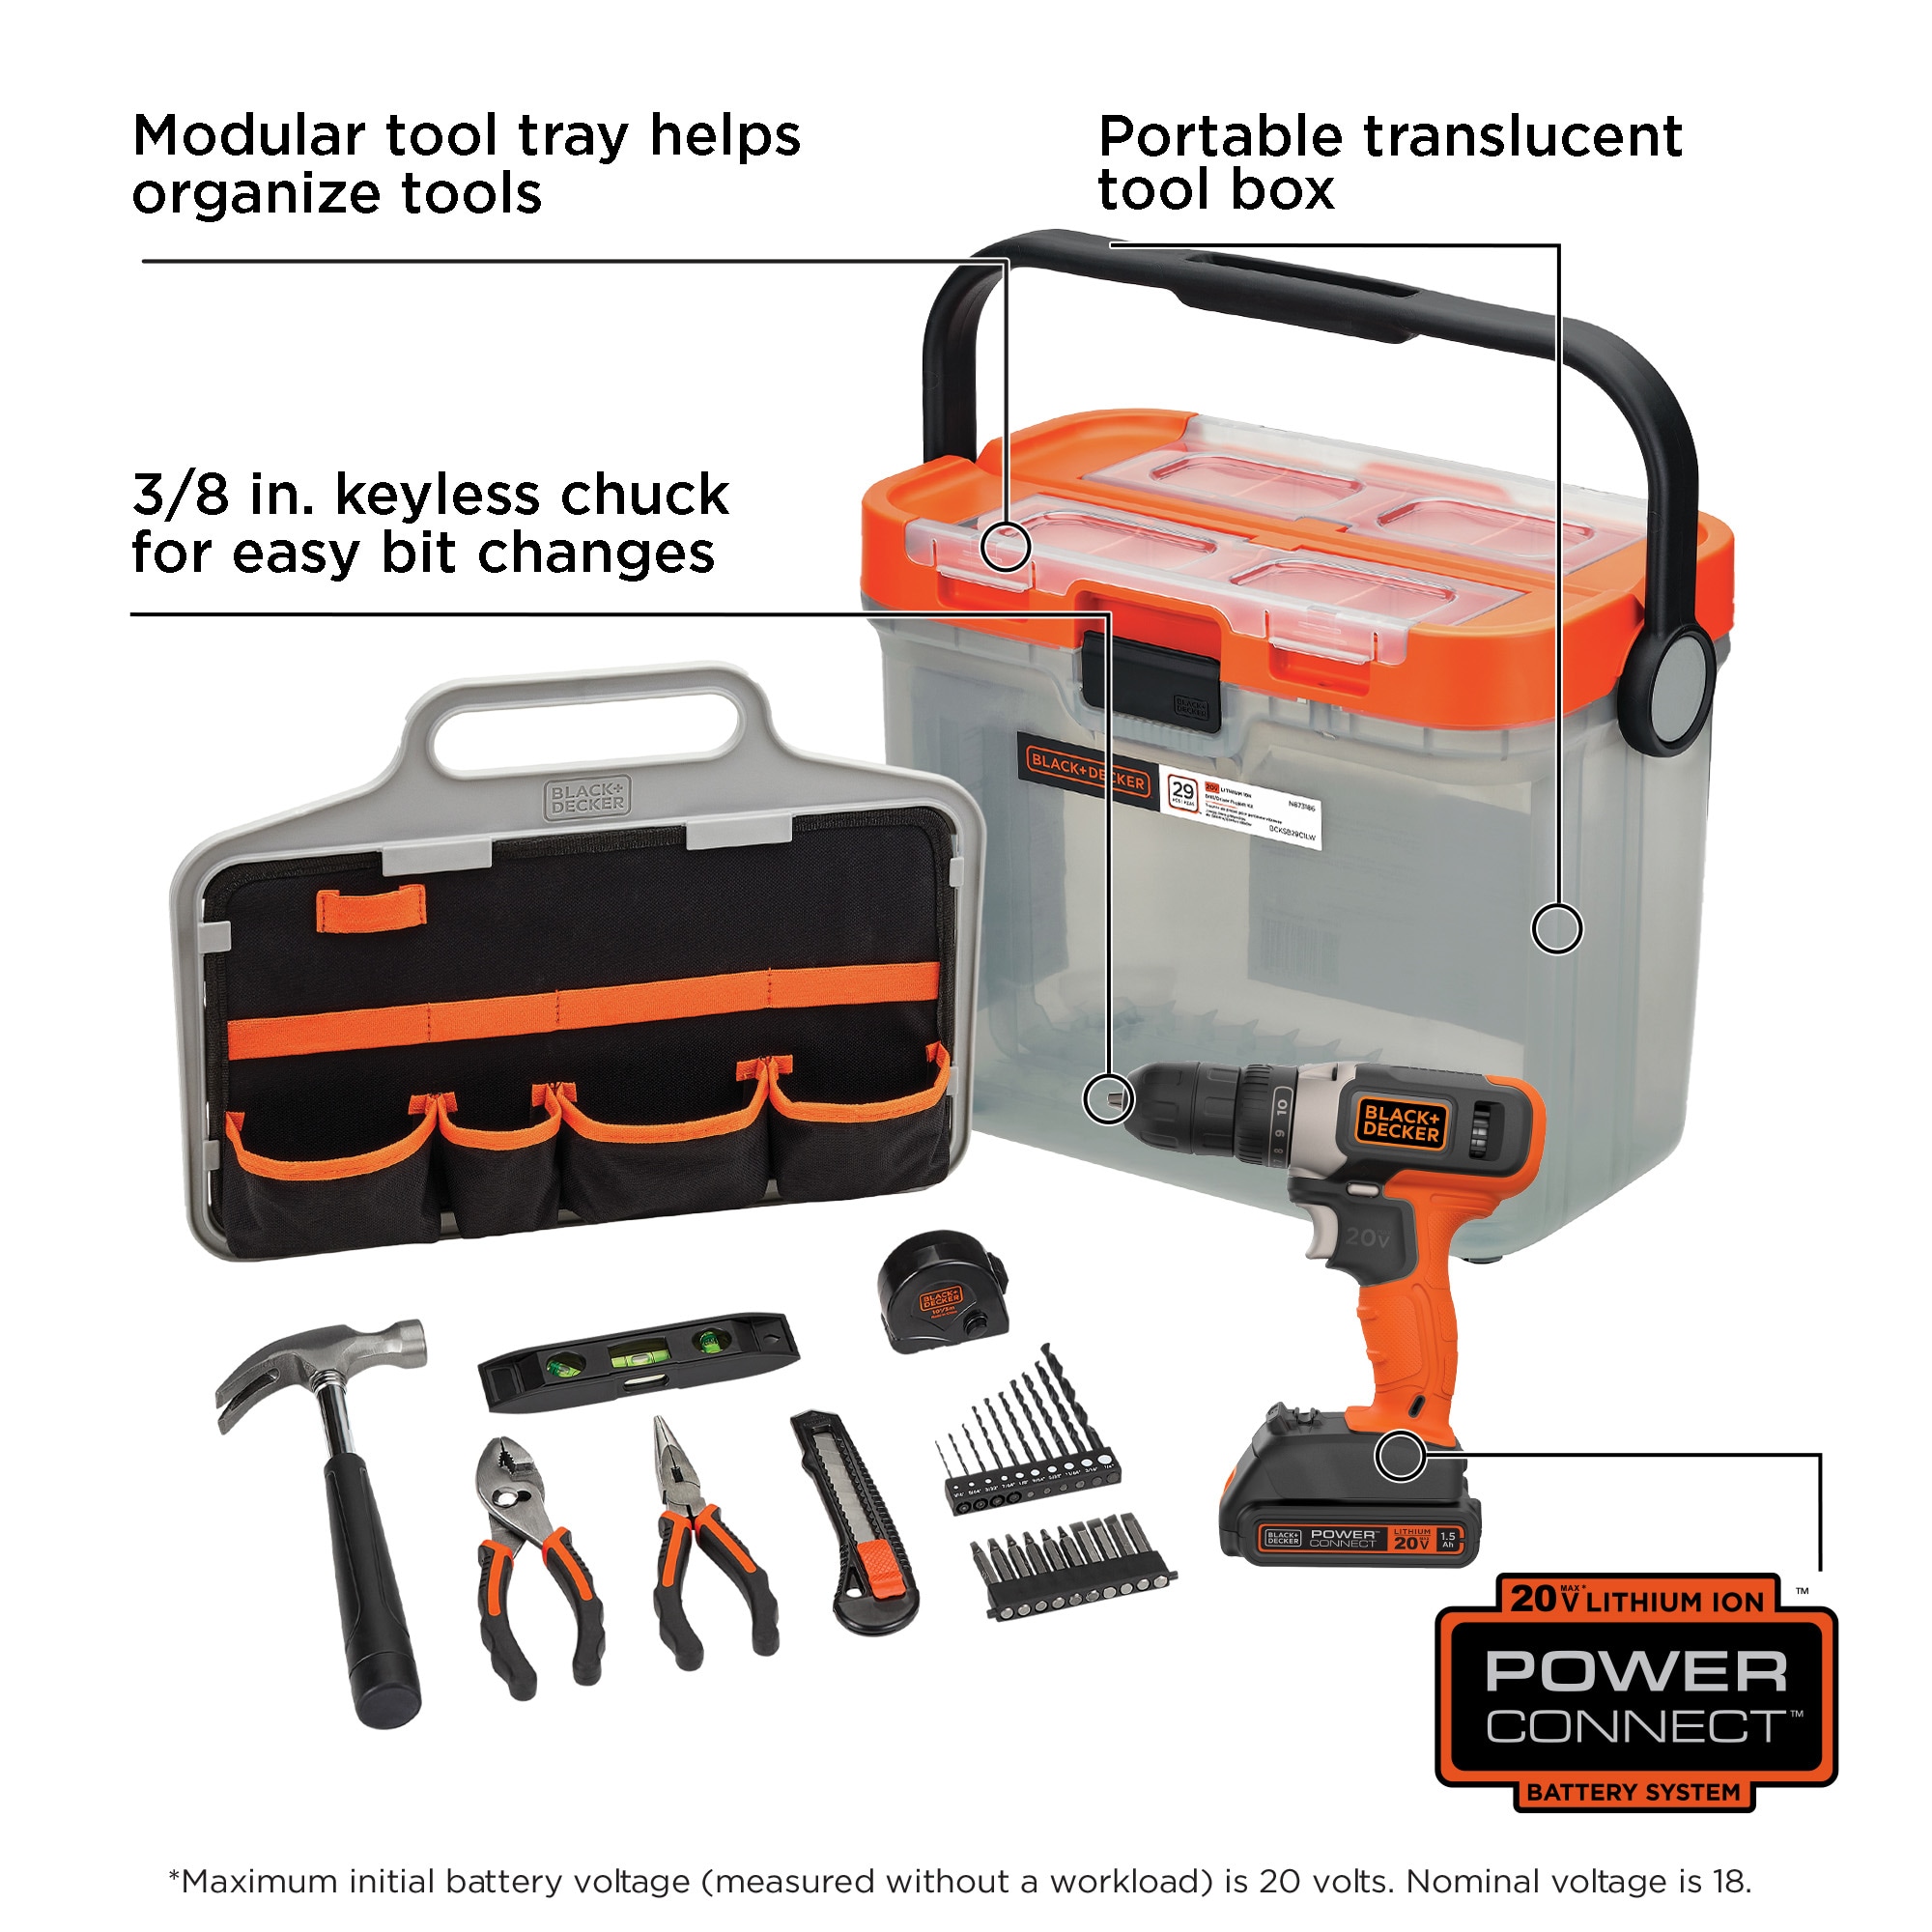 BLACK+DECKER 29-Piece Household Tool Set with Hard Case in the